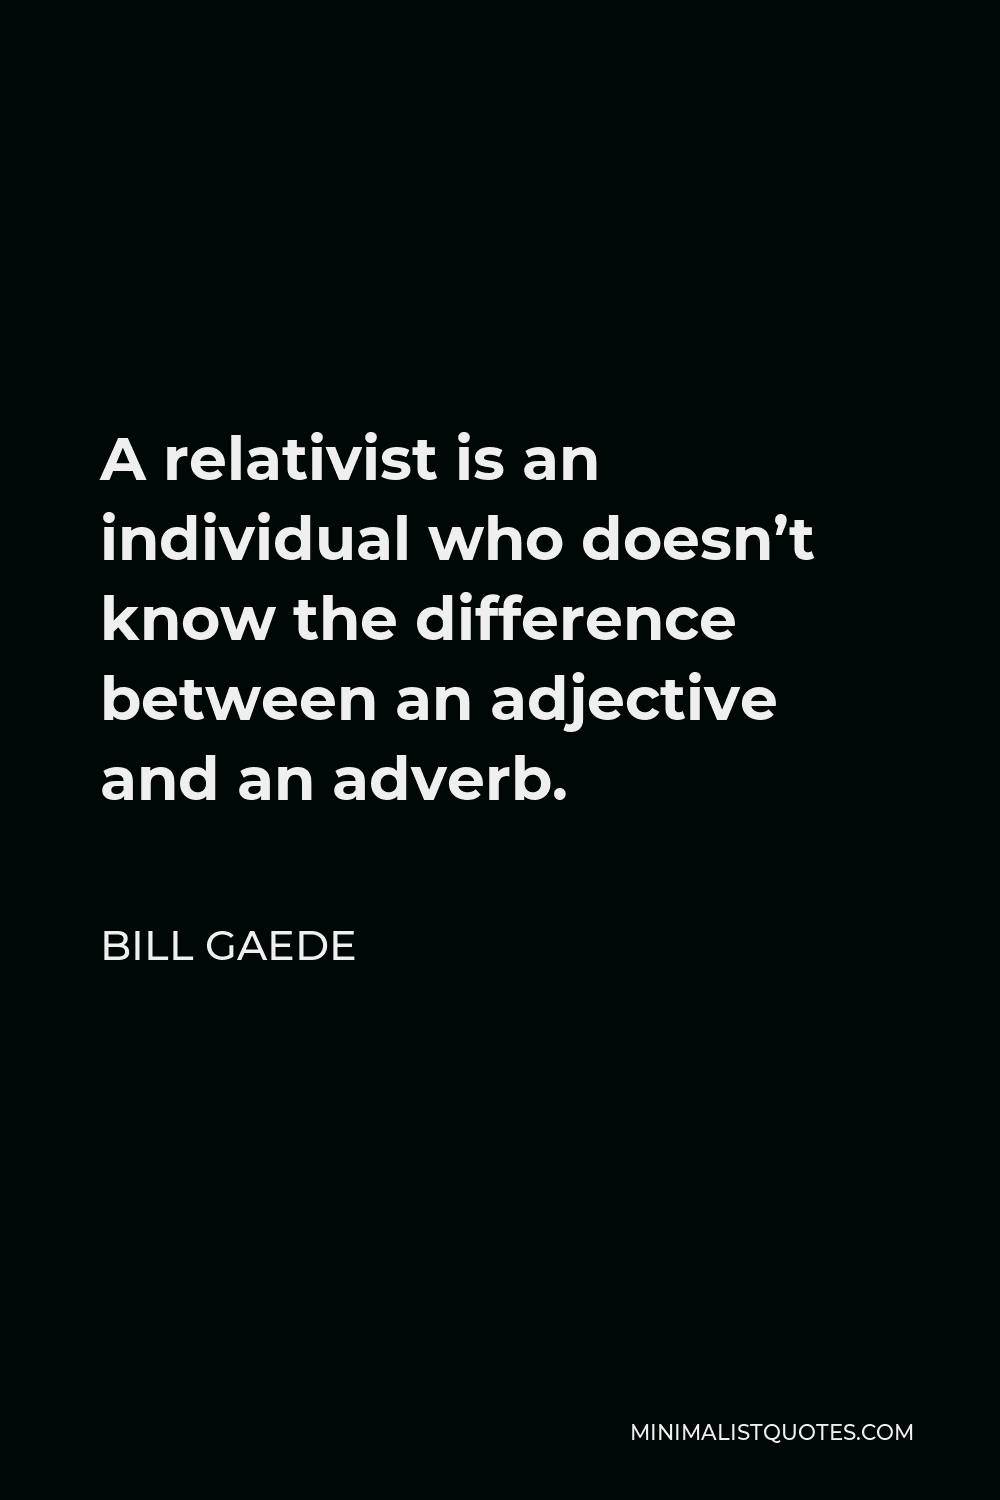 Bill Gaede Quote - A relativist is an individual who doesn’t know the difference between an adjective and an adverb.